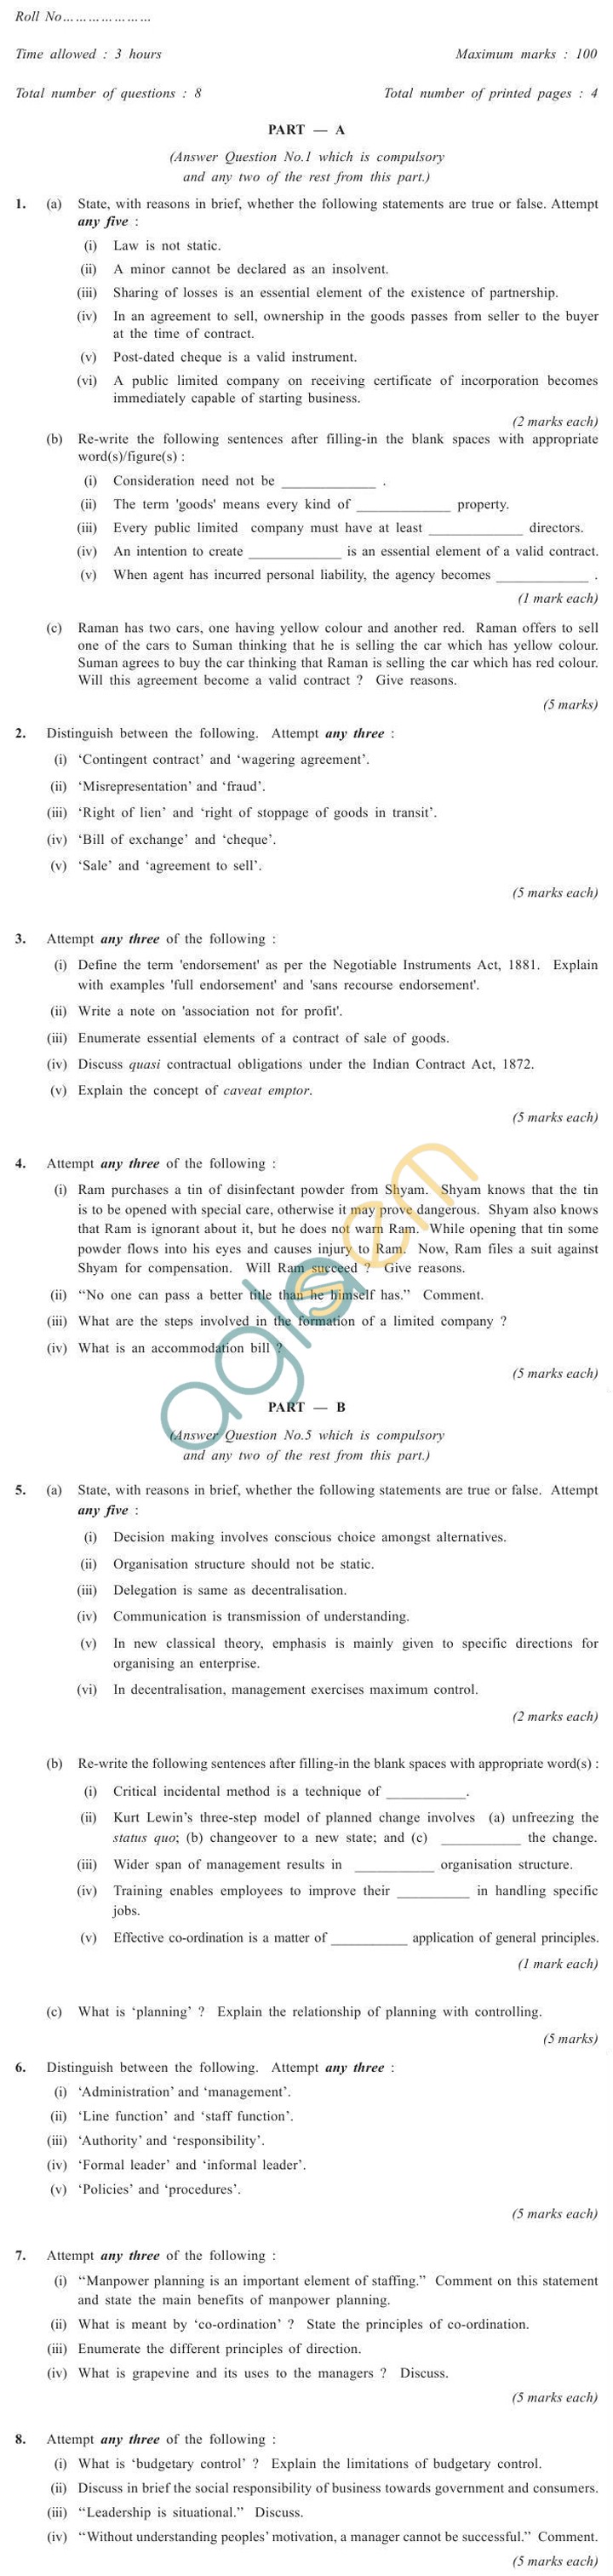 CS Foundation Question Papers Jun 2013 - Elements of Business Laws and Management